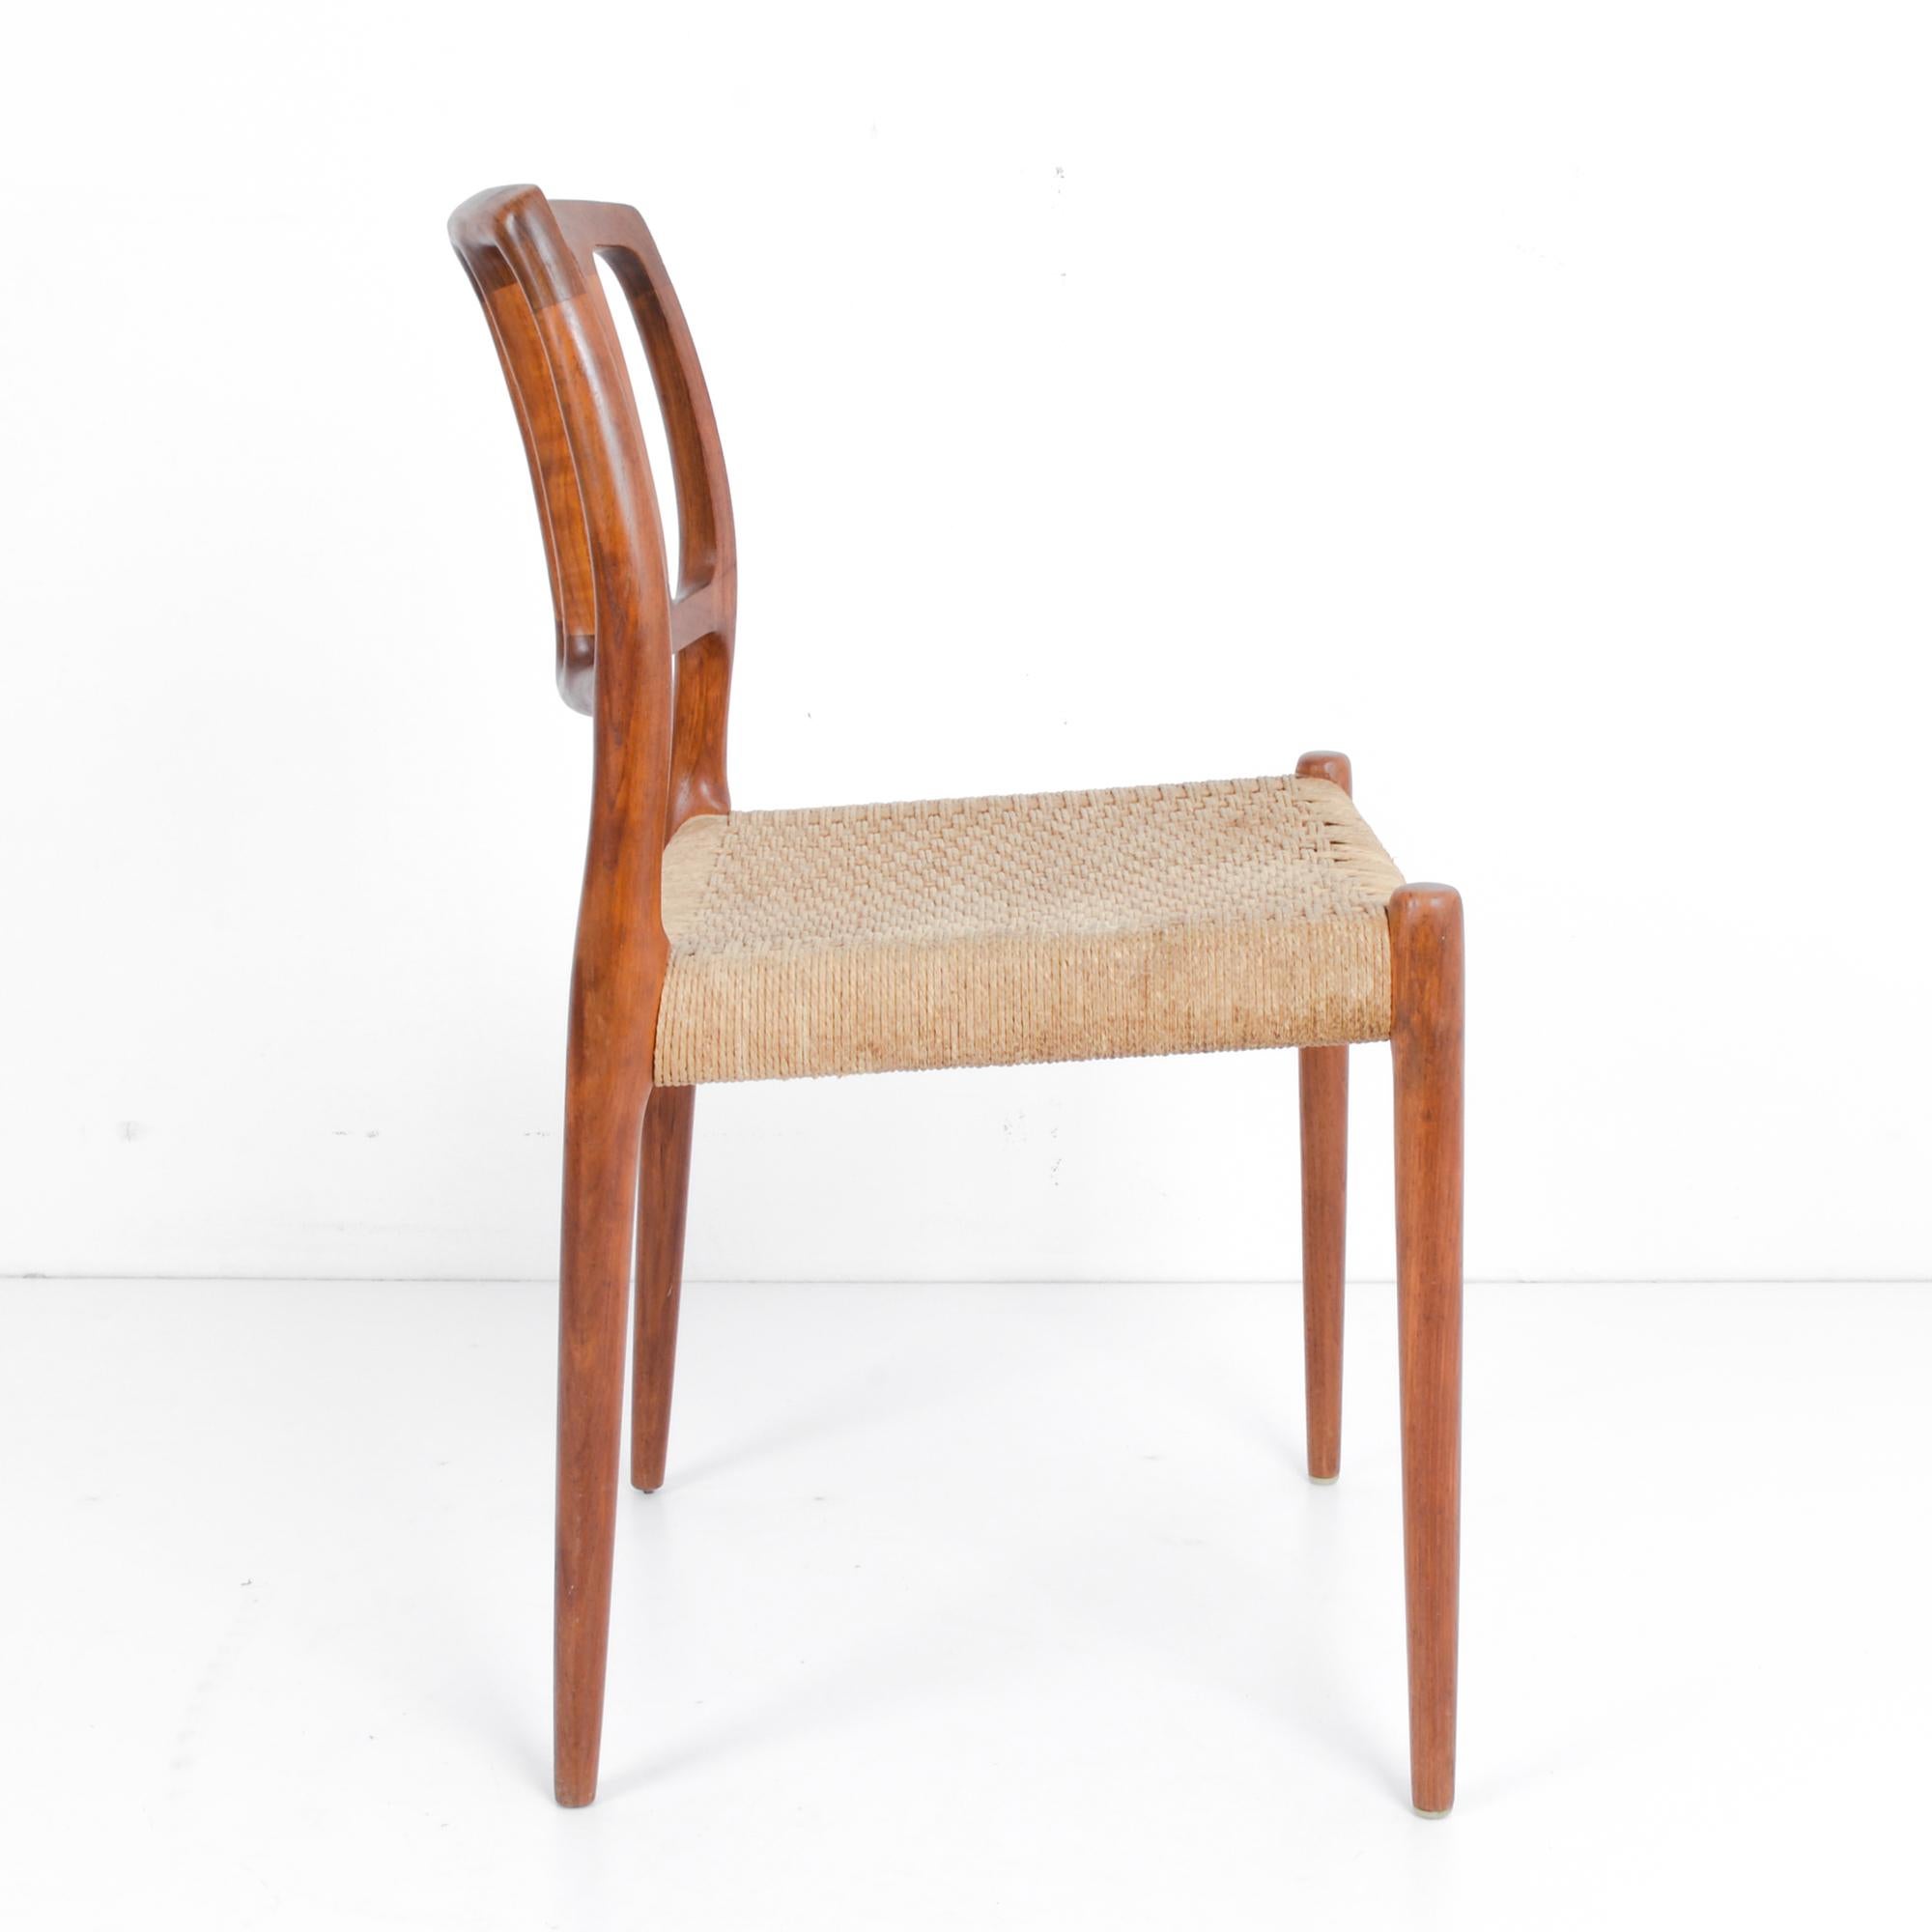 1960s Danish Teak Chair by Arne Hovmand Olsen In Good Condition For Sale In High Point, NC